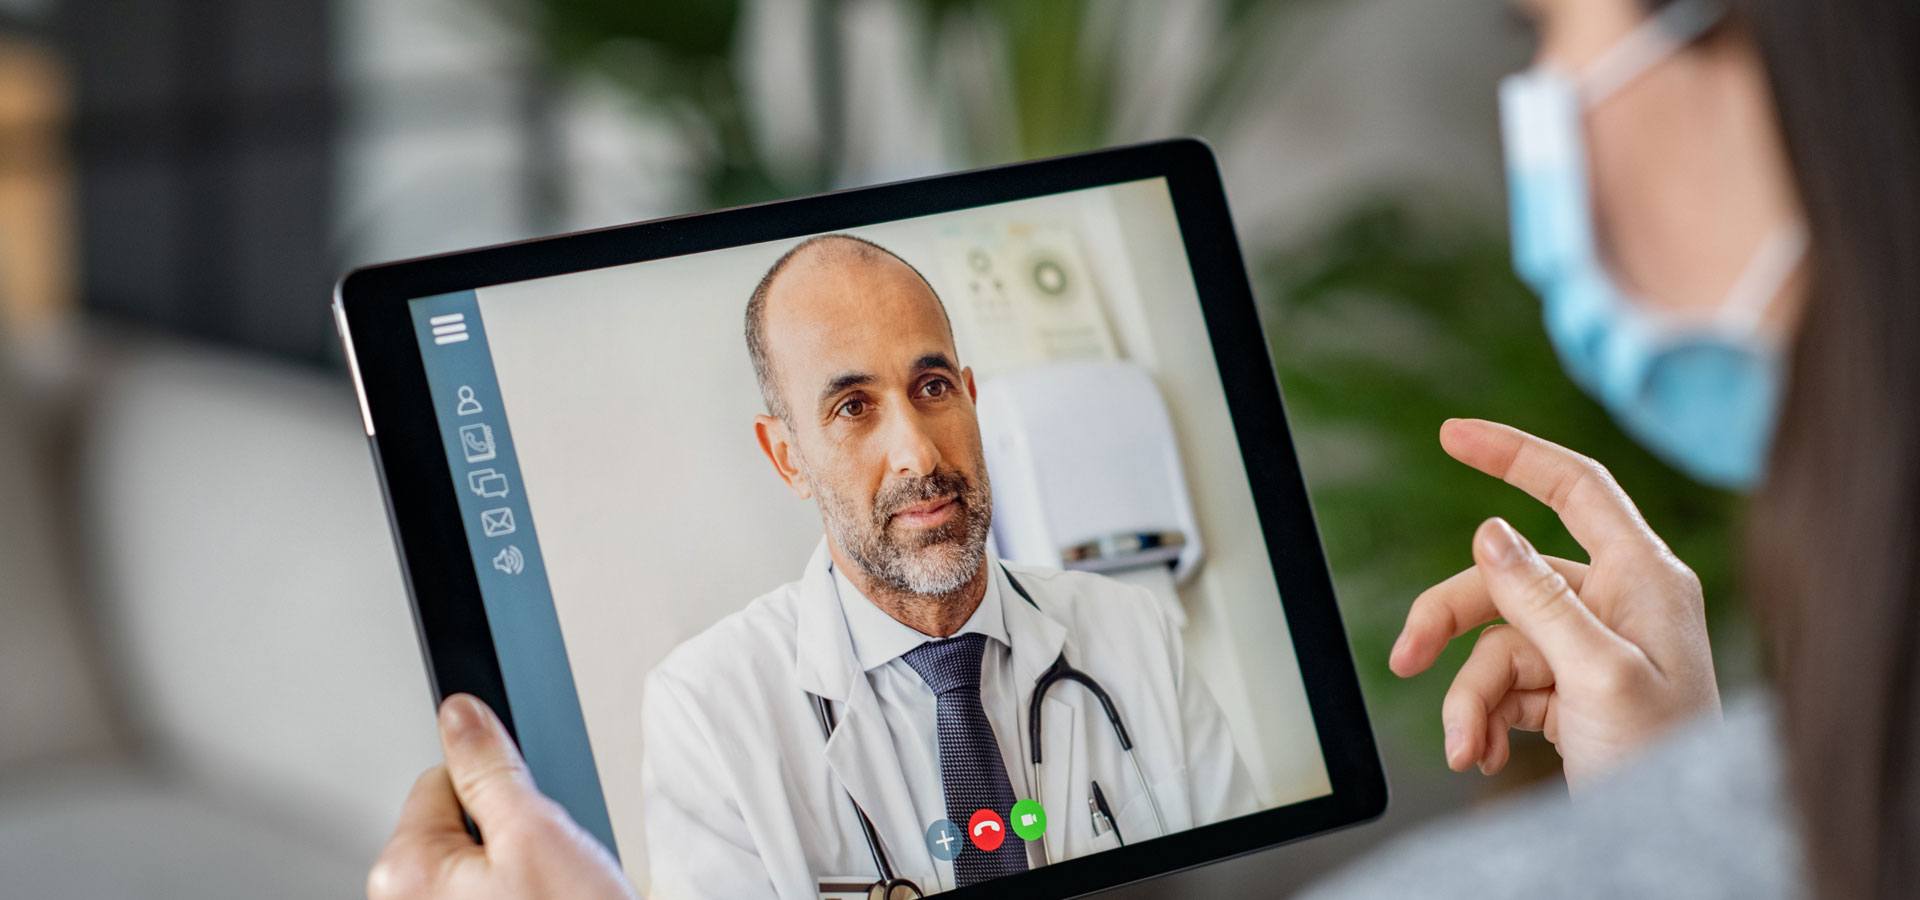 Patient in video conference with doctor